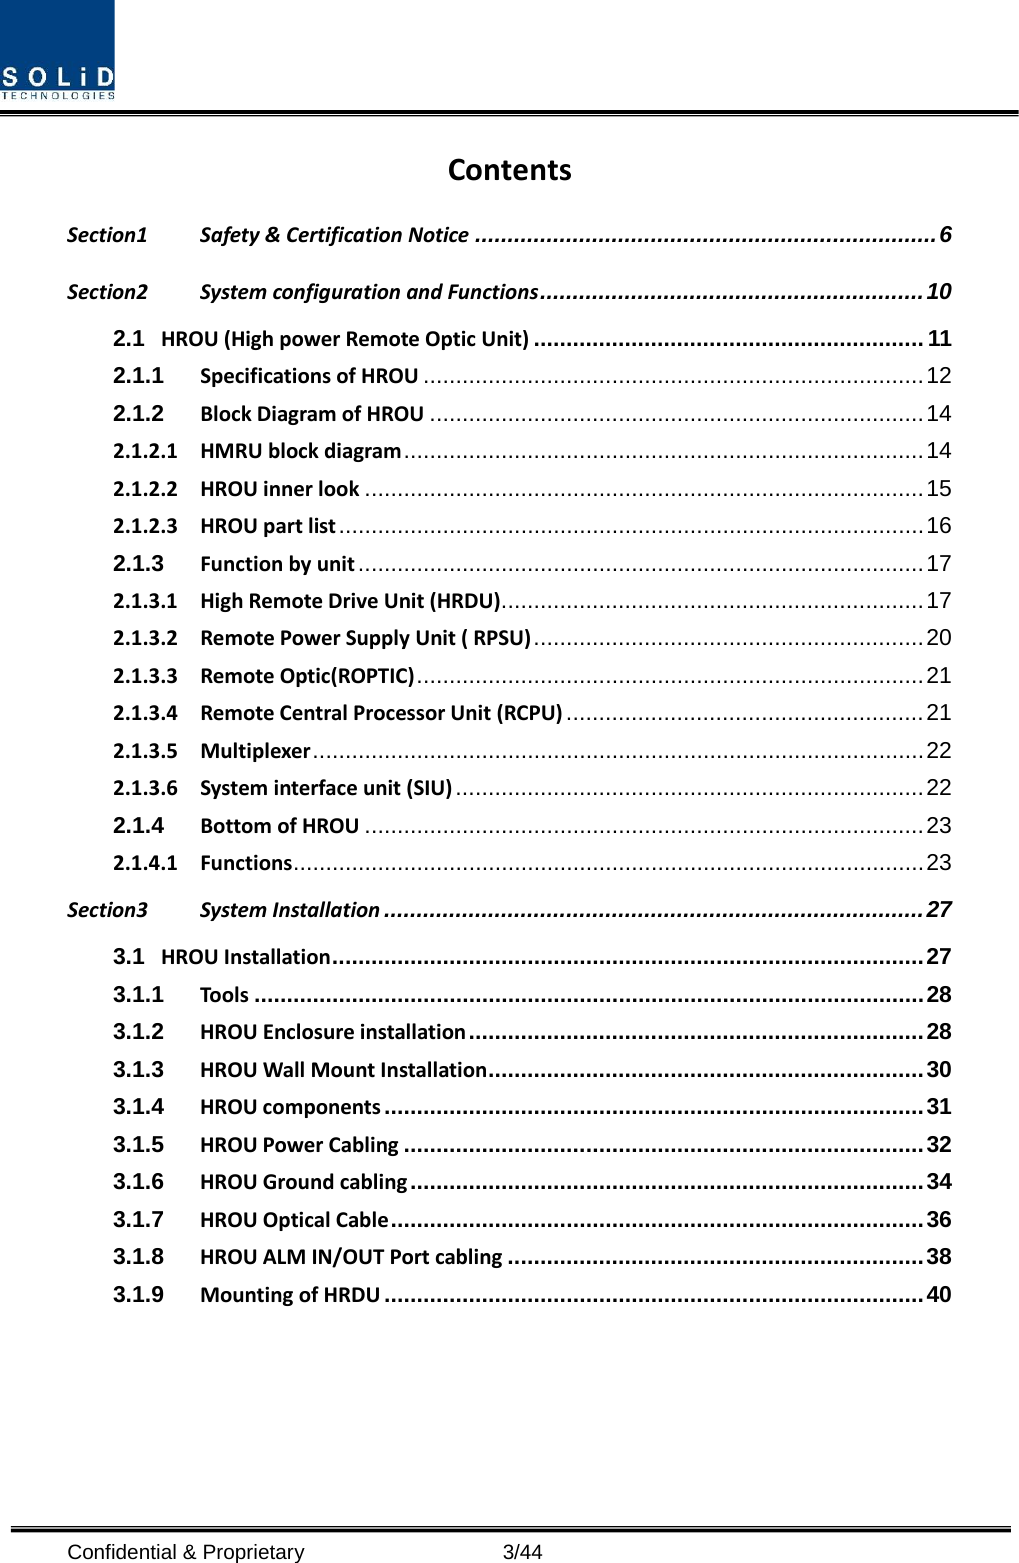  Confidential &amp; Proprietary                    3/44 Contents Section1 Safety &amp; Certification Notice ....................................................................... 6 Section2 System configuration and Functions ........................................................... 10 2.1 HROU (High power Remote Optic Unit) ............................................................ 11 2.1.1 Specifications of HROU ............................................................................. 12 2.1.2 Block Diagram of HROU ............................................................................ 14 2.1.2.1 HMRU block diagram ................................................................................ 14 2.1.2.2 HROU inner look ...................................................................................... 15 2.1.2.3 HROU part list .......................................................................................... 16 2.1.3 Function by unit ....................................................................................... 17 2.1.3.1 High Remote Drive Unit (HRDU) ................................................................. 17 2.1.3.2 Remote Power Supply Unit ( RPSU) ............................................................ 20 2.1.3.3 Remote Optic(ROPTIC) .............................................................................. 21 2.1.3.4 Remote Central Processor Unit (RCPU) ....................................................... 21 2.1.3.5 Multiplexer .............................................................................................. 22 2.1.3.6 System interface unit (SIU) ........................................................................ 22 2.1.4 Bottom of HROU ...................................................................................... 23 2.1.4.1 Functions ................................................................................................. 23 Section3 System Installation ................................................................................... 27 3.1 HROU Installation ........................................................................................... 27 3.1.1 Tools ....................................................................................................... 28 3.1.2 HROU Enclosure installation ...................................................................... 28 3.1.3 HROU Wall Mount Installation ................................................................... 30 3.1.4 HROU components ................................................................................... 31 3.1.5 HROU Power Cabling ................................................................................ 32 3.1.6 HROU Ground cabling ............................................................................... 34 3.1.7 HROU Optical Cable .................................................................................. 36 3.1.8 HROU ALM IN/OUT Port cabling ................................................................ 38 3.1.9 Mounting of HRDU ................................................................................... 40  